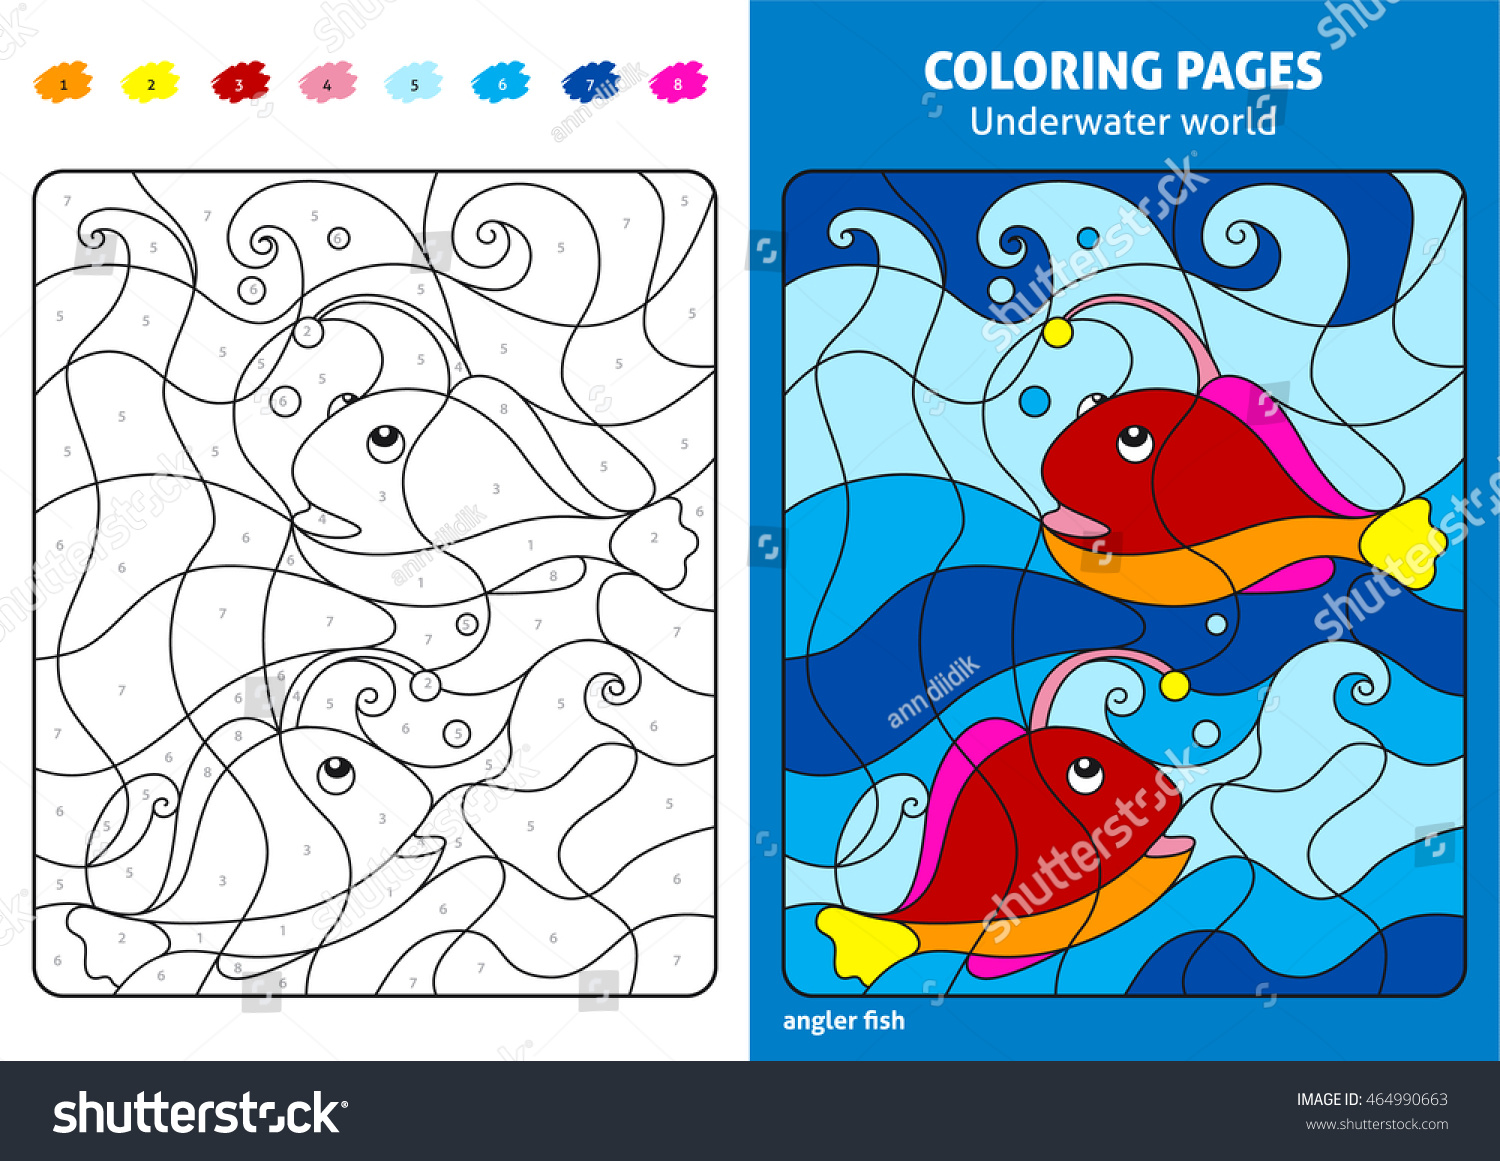 Download Underwater World Coloring Page Kids Angler Stock Vector 464990663 - Shutterstock